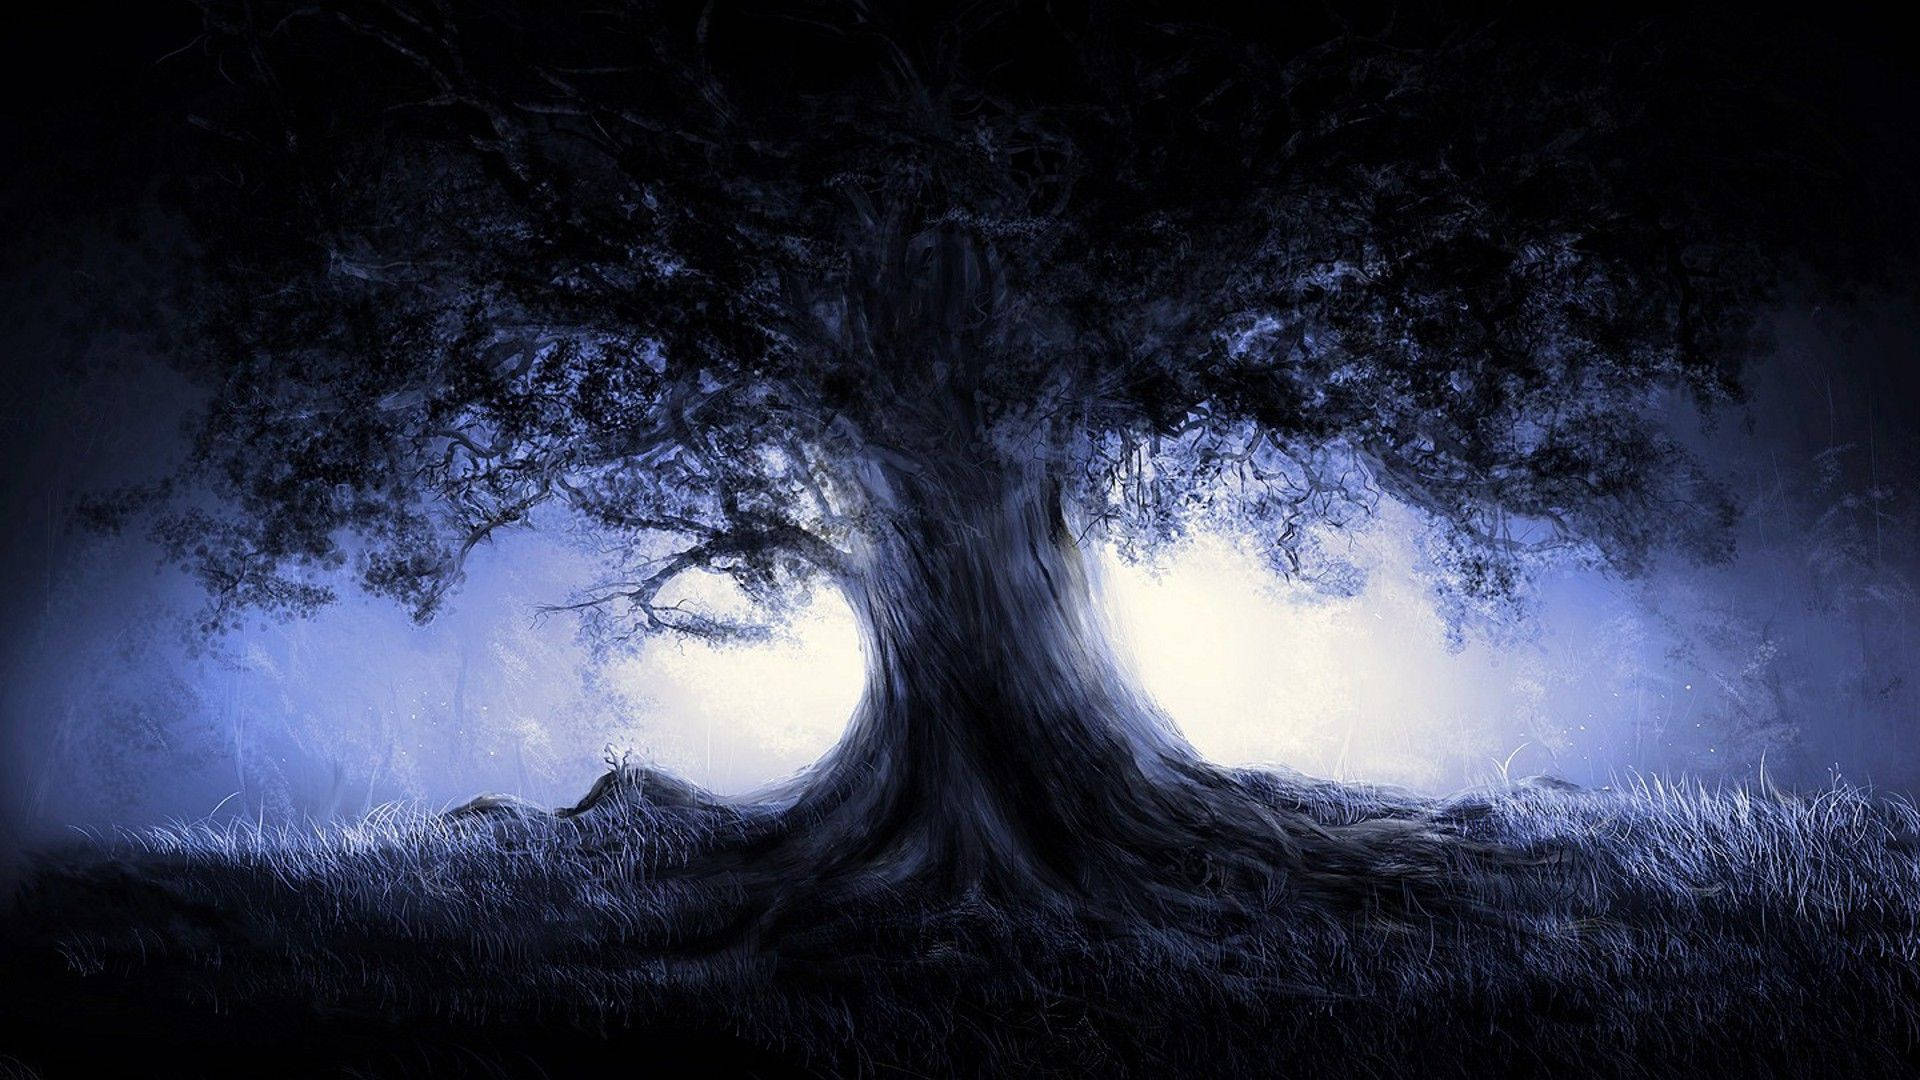 A Giant Tree in a Dark Forest Wallpaper